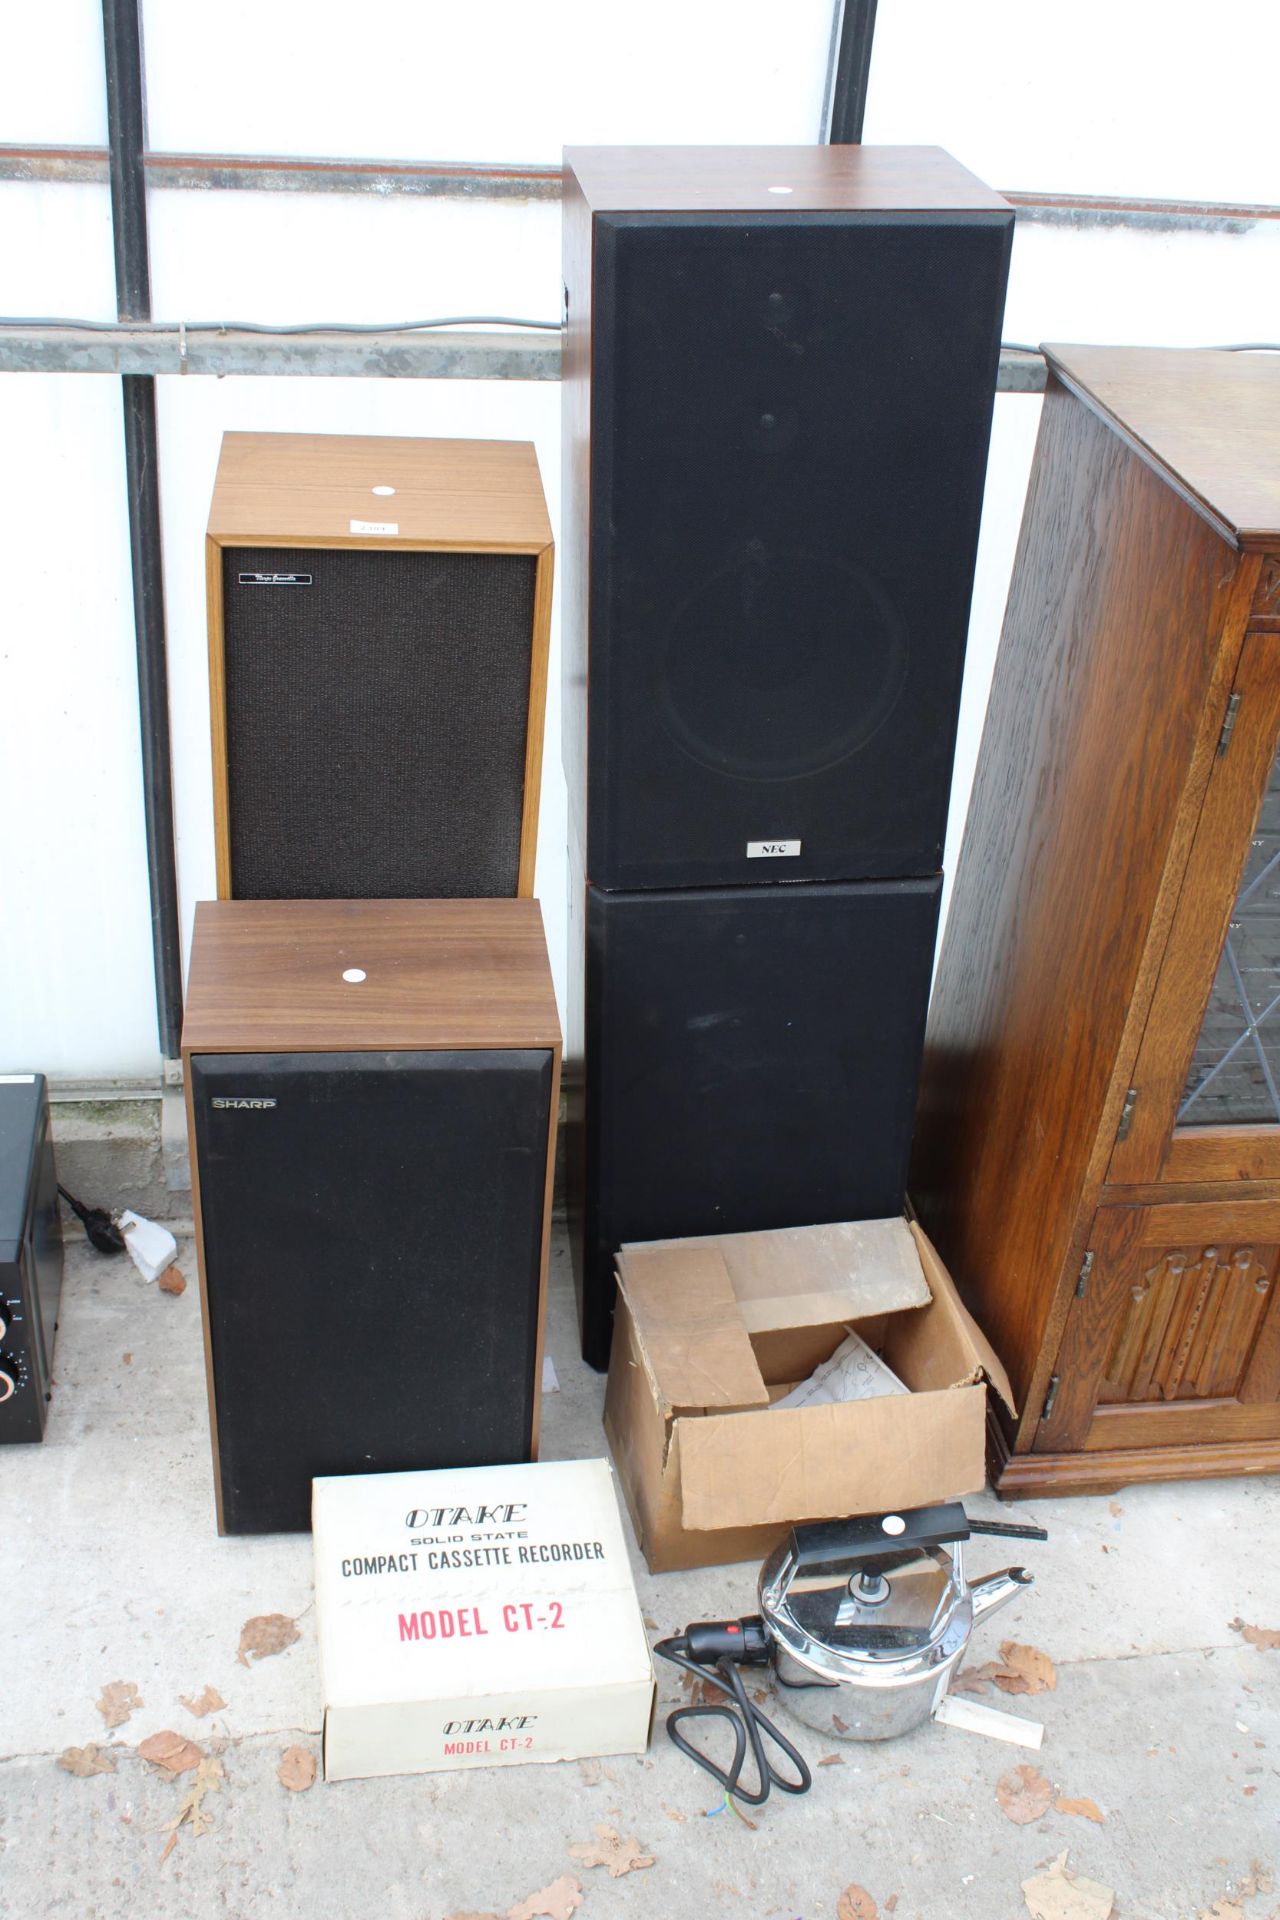 VARIOUS ITEMS TO INC;UDE FOUR LARGE SPEAKERS, A COMPACT CASSETTE RECORDER AND A KETTLE